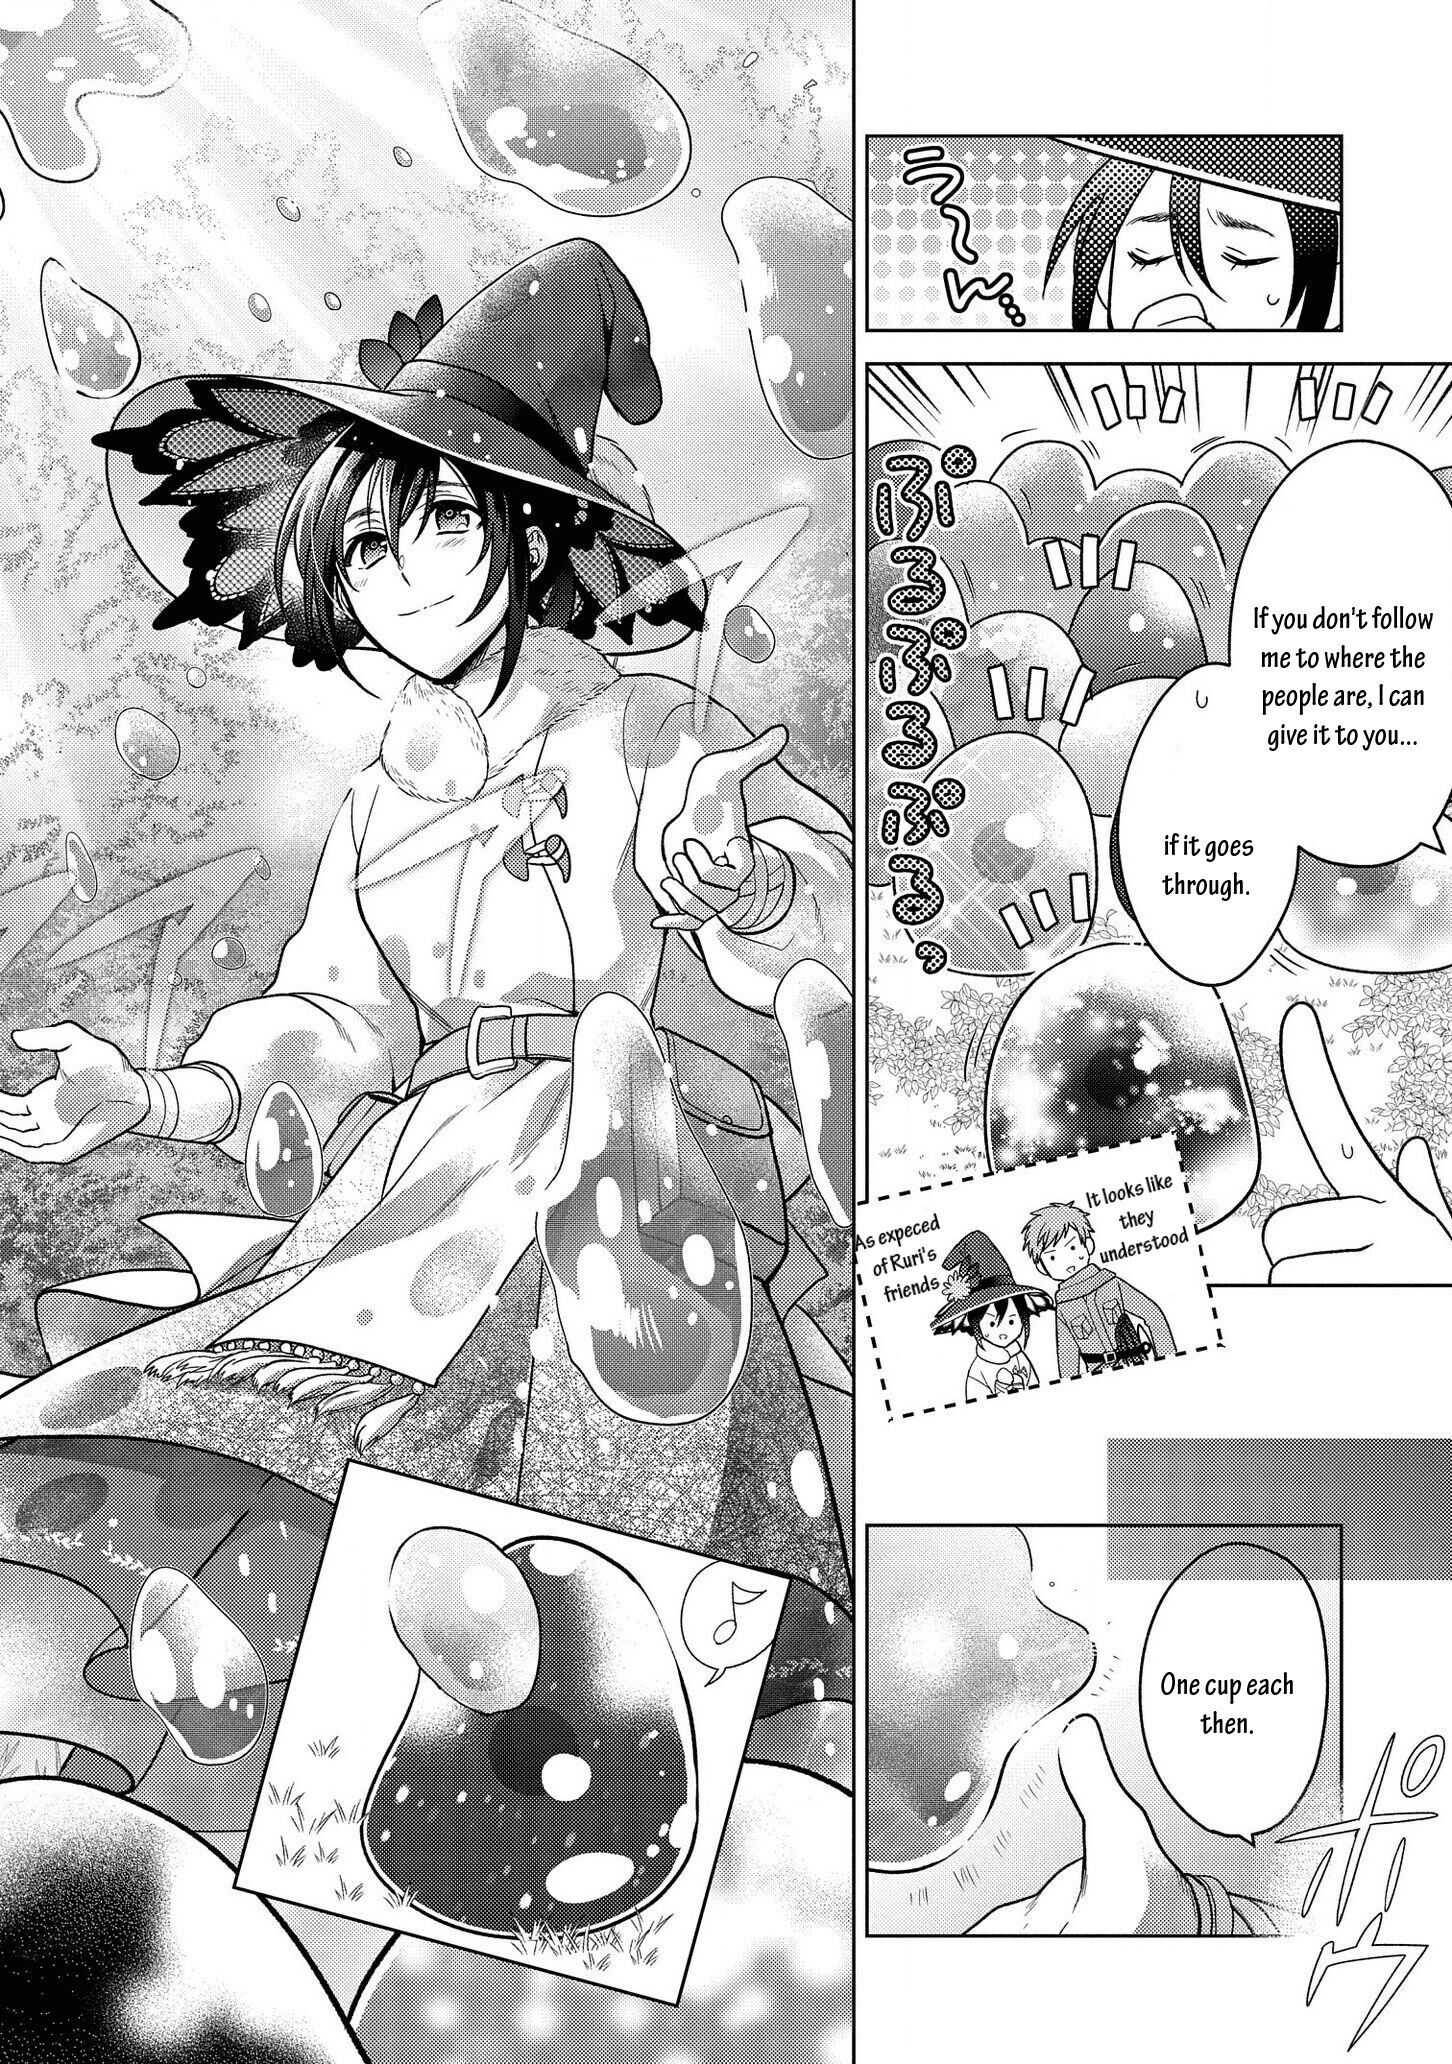 Life In Another World As A Housekeeping Mage - chapter 12.2 - #6